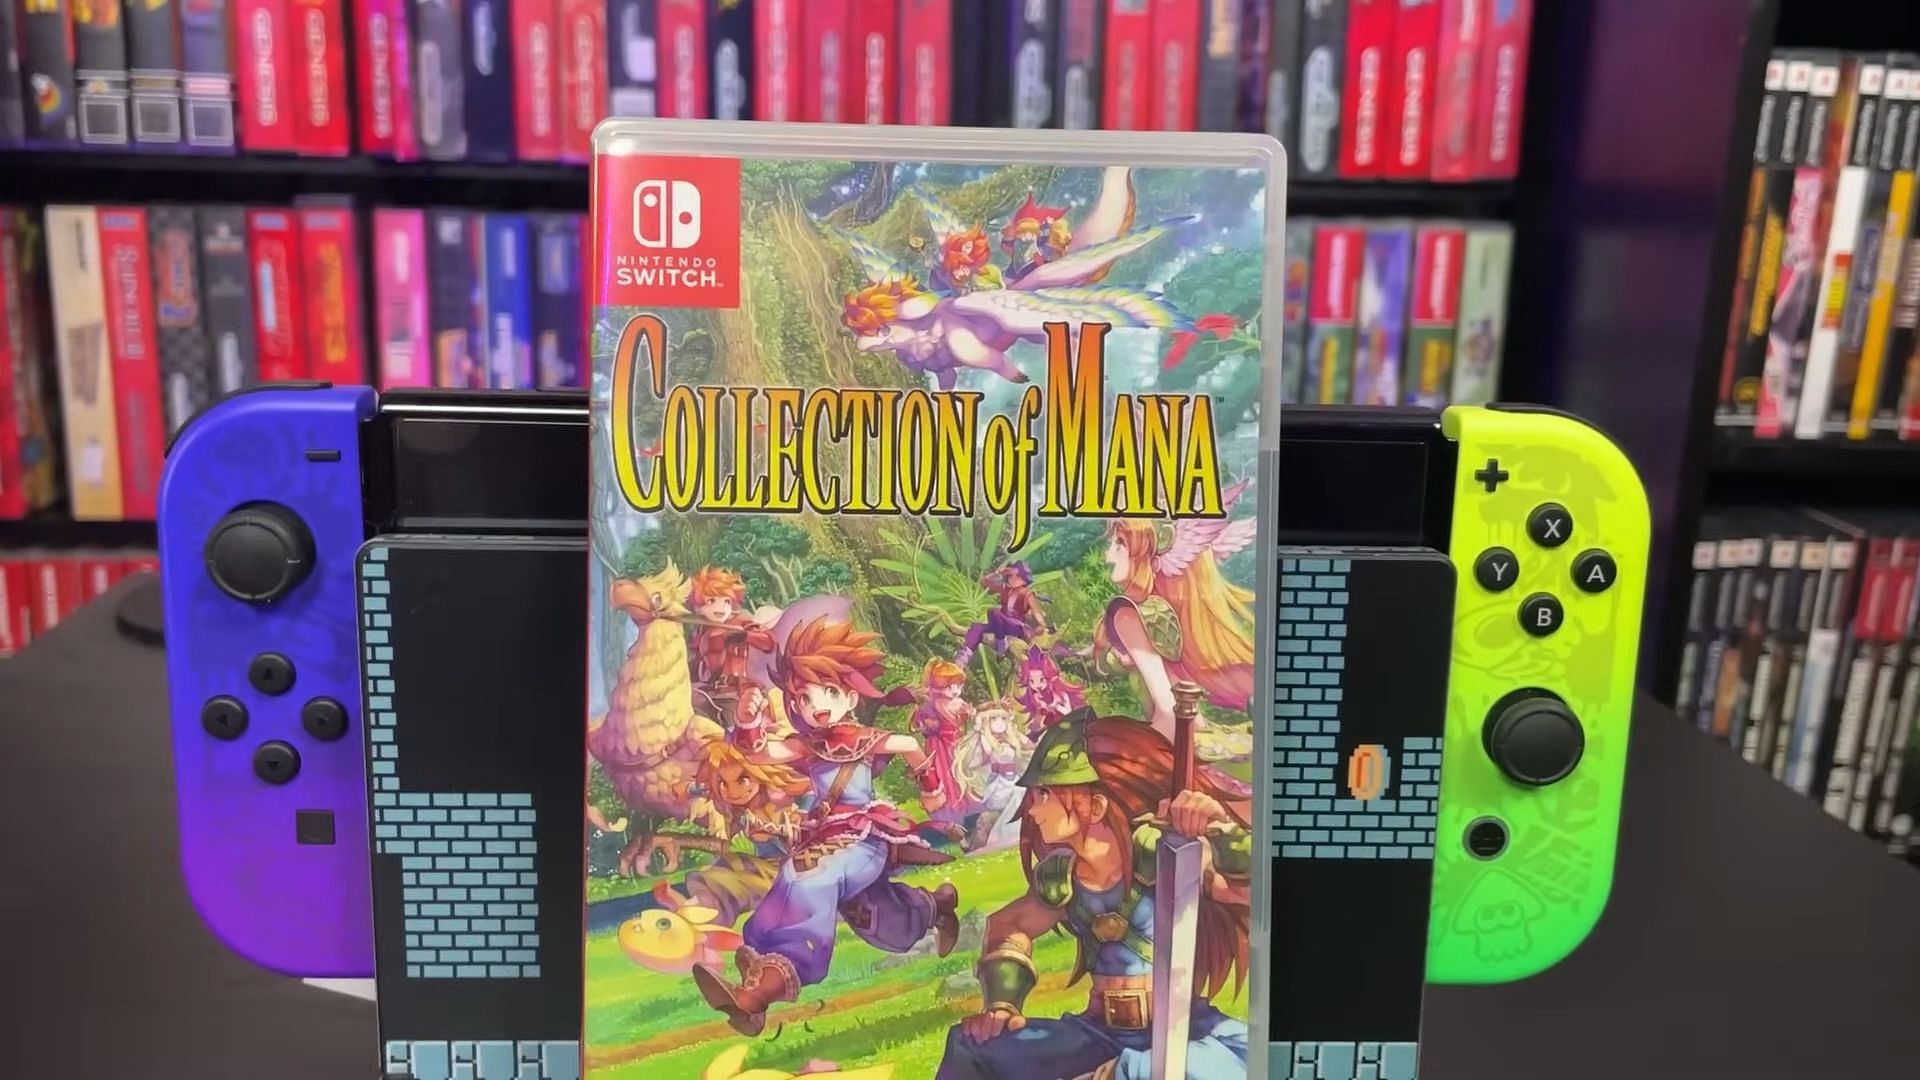 The Nintendo Switch with Collection of Mana (Image via Gaming Off The Grid/YouTube)